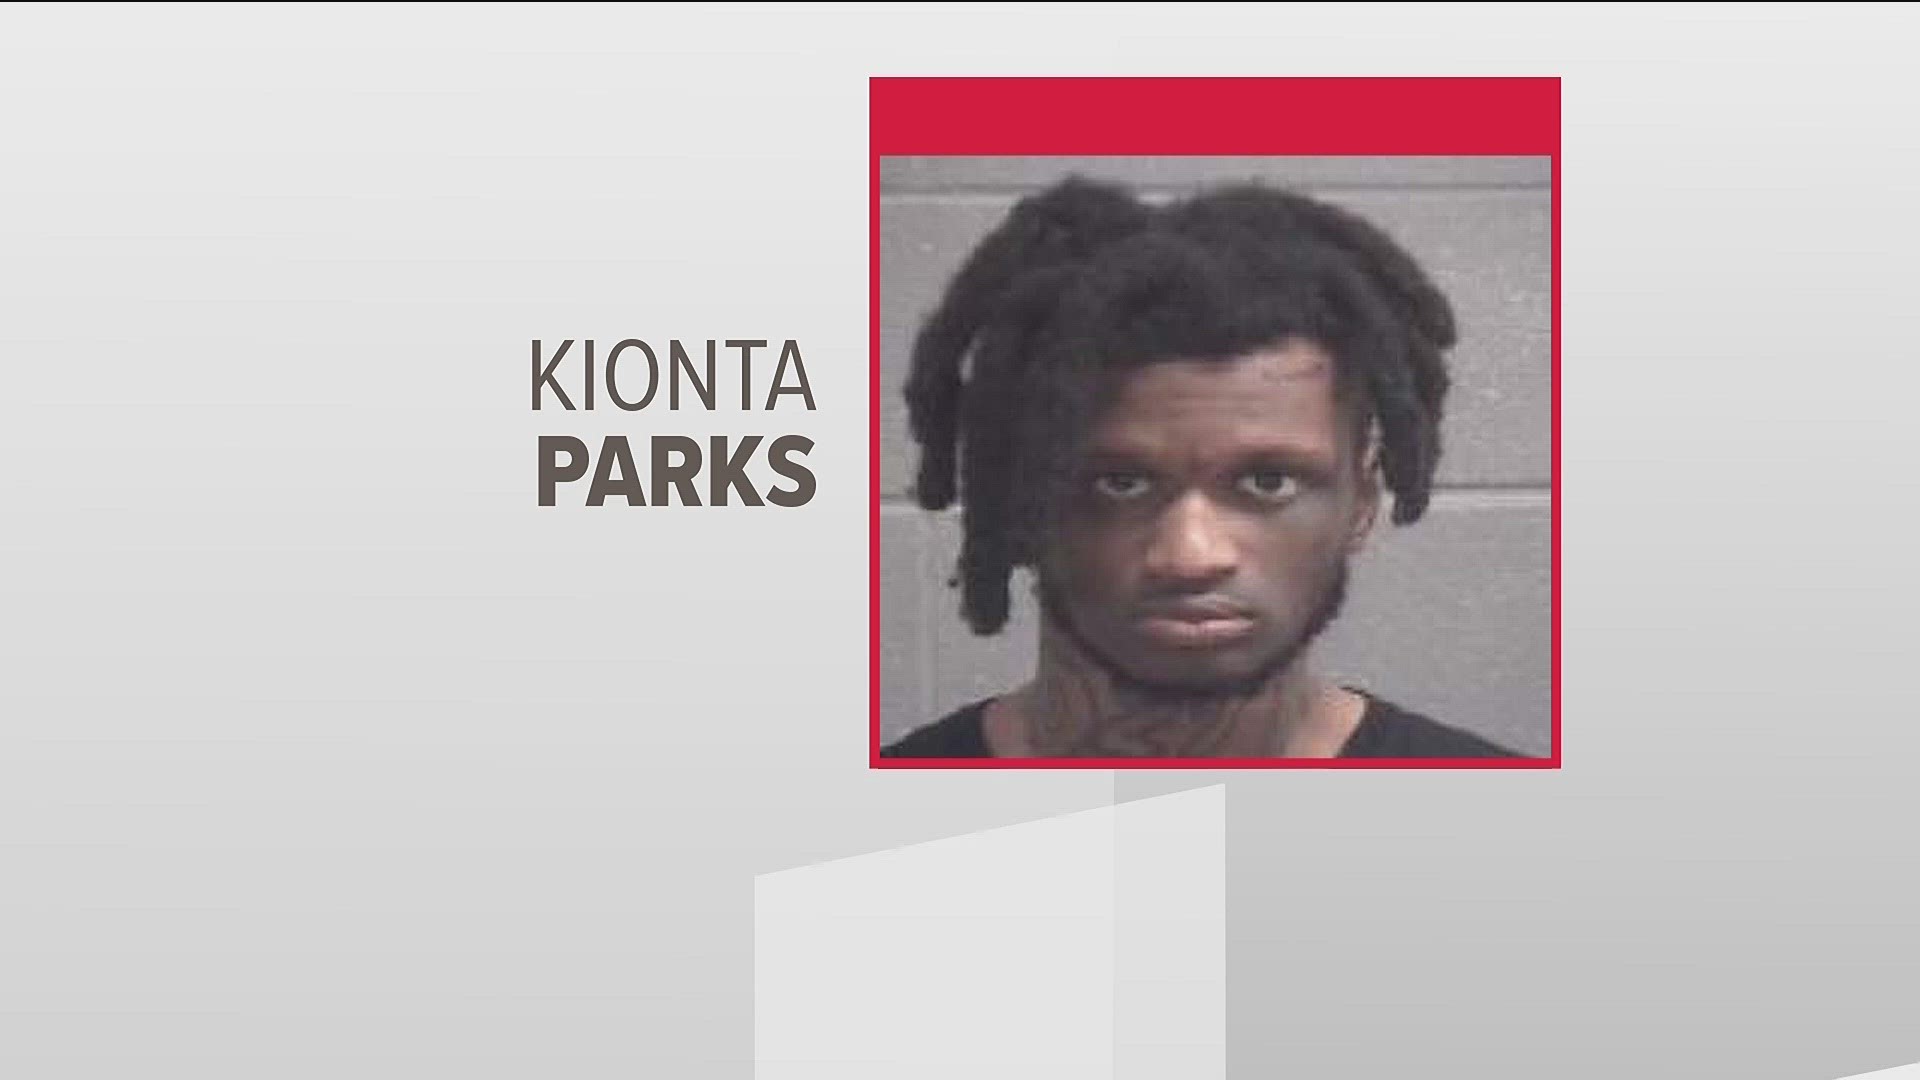 Kionta Jahaun Parks is wanted in connection to a shooting that killed an 11-year-old girl. She was struck by a stray bullet, deputies said.